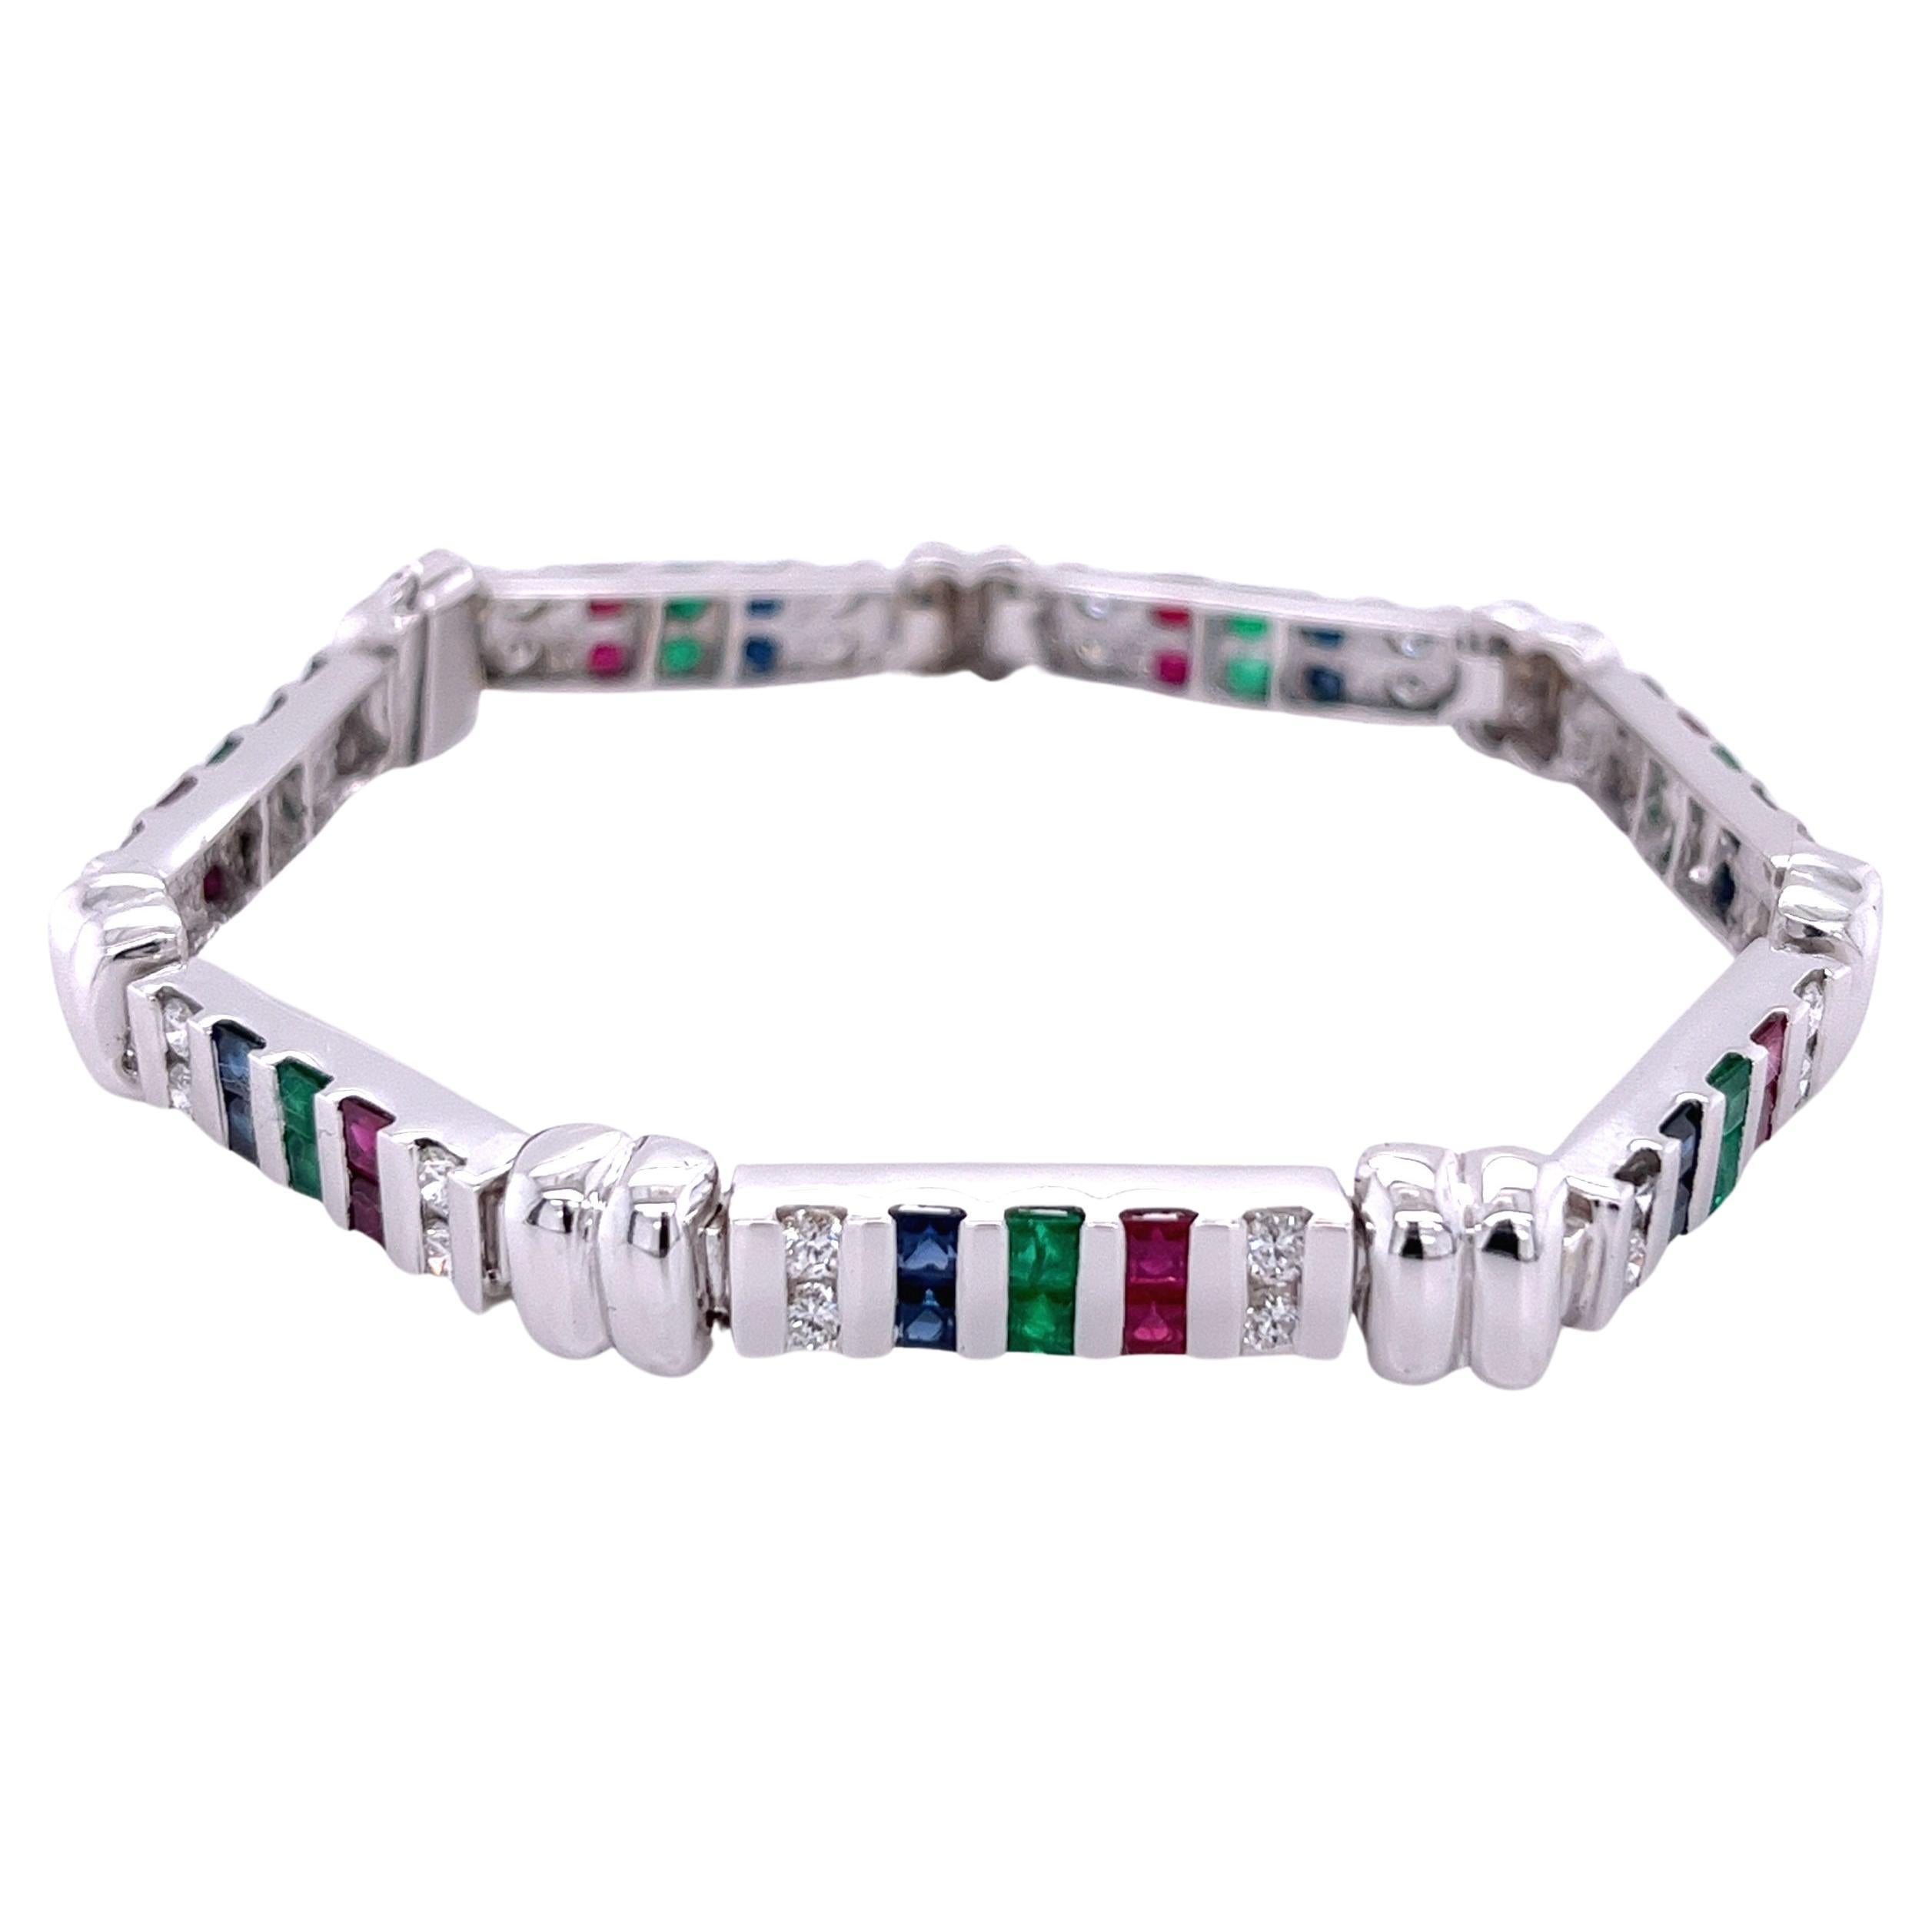 12 Carat Diamond, Ruby, Emerald and Sapphire 18K White Gold Bracelet For Sale